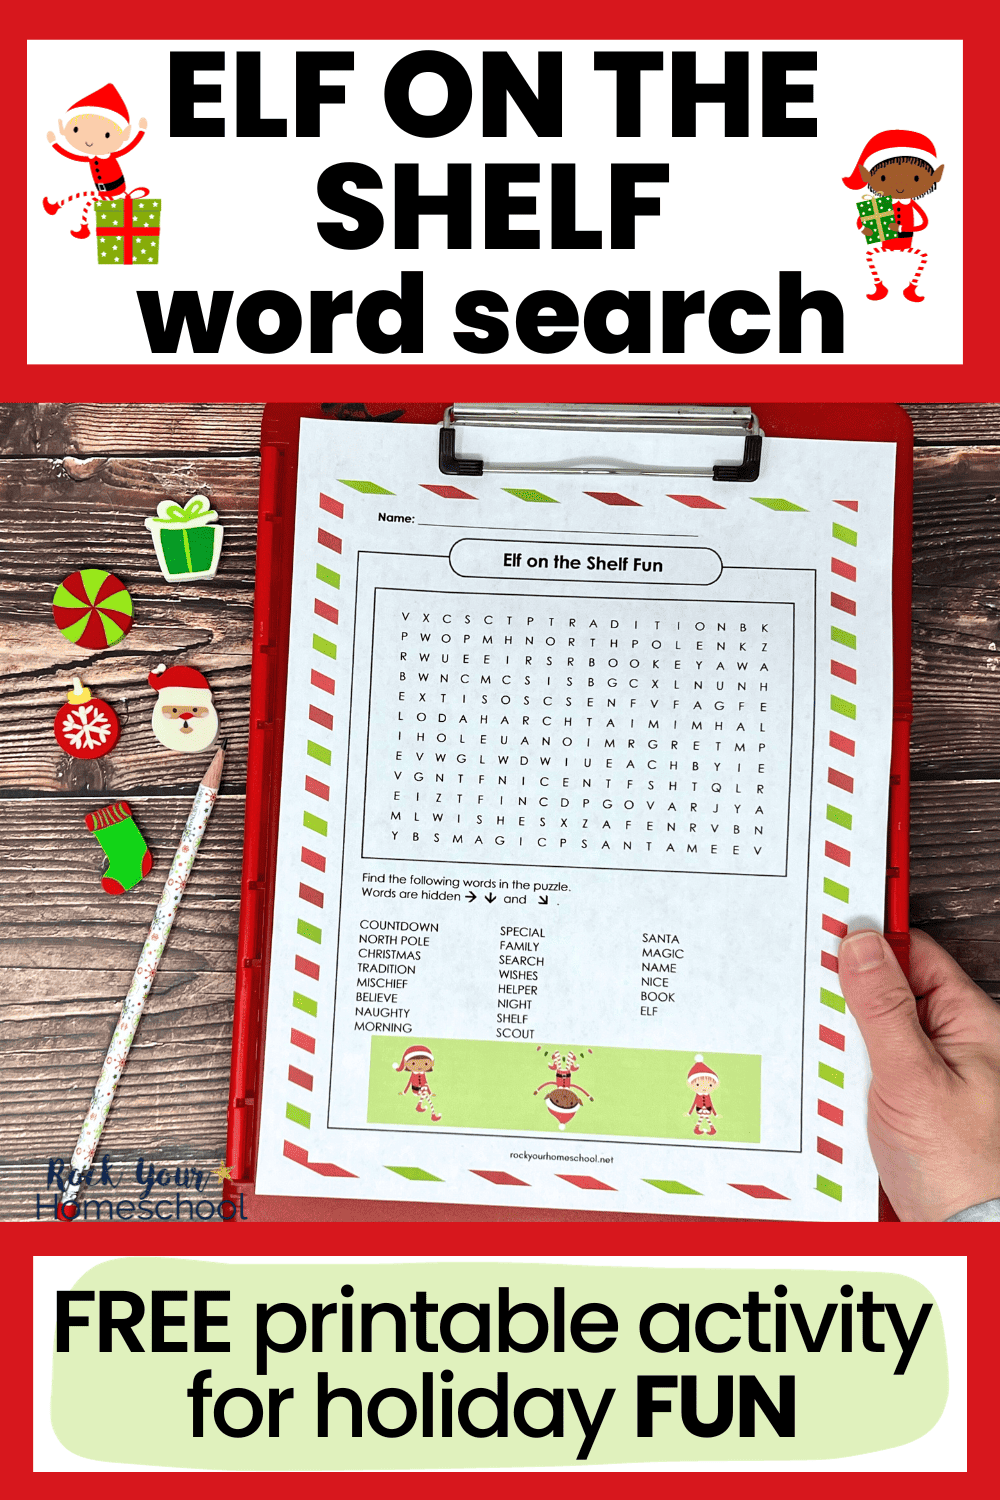 Woman holding red clipboard with free printable elf on the shelf word search activity.